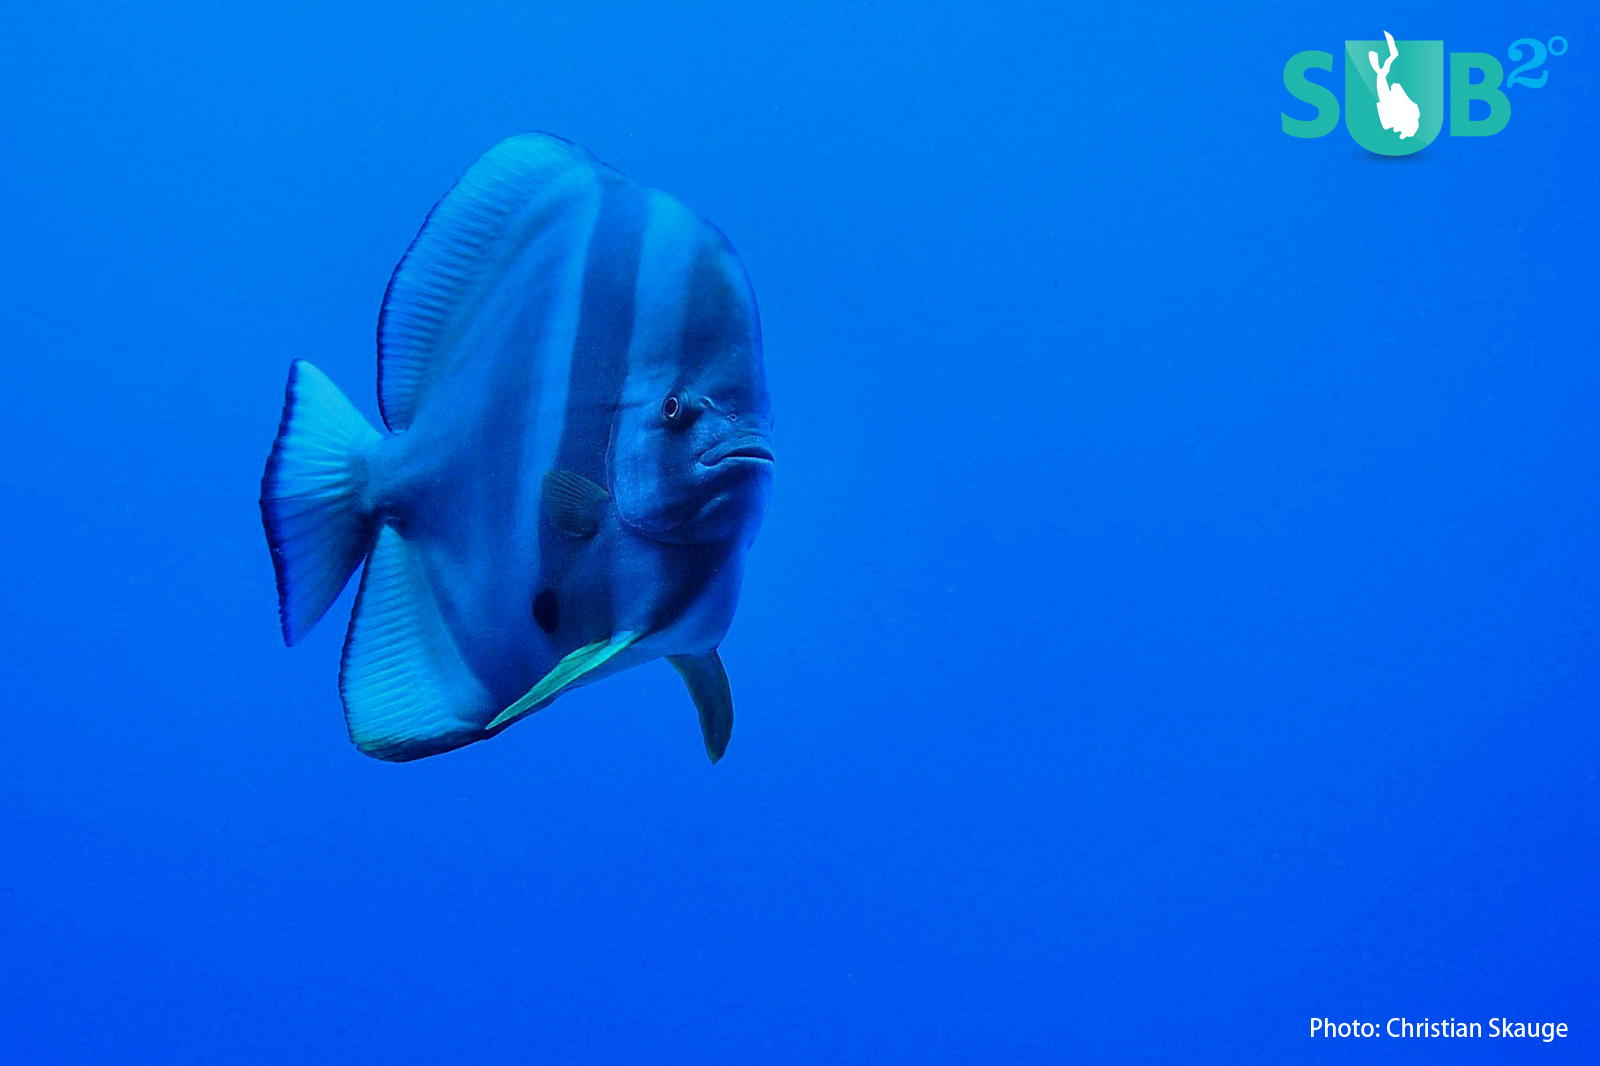 Without strobes, this batfish takes on an unmistakable blue hue.